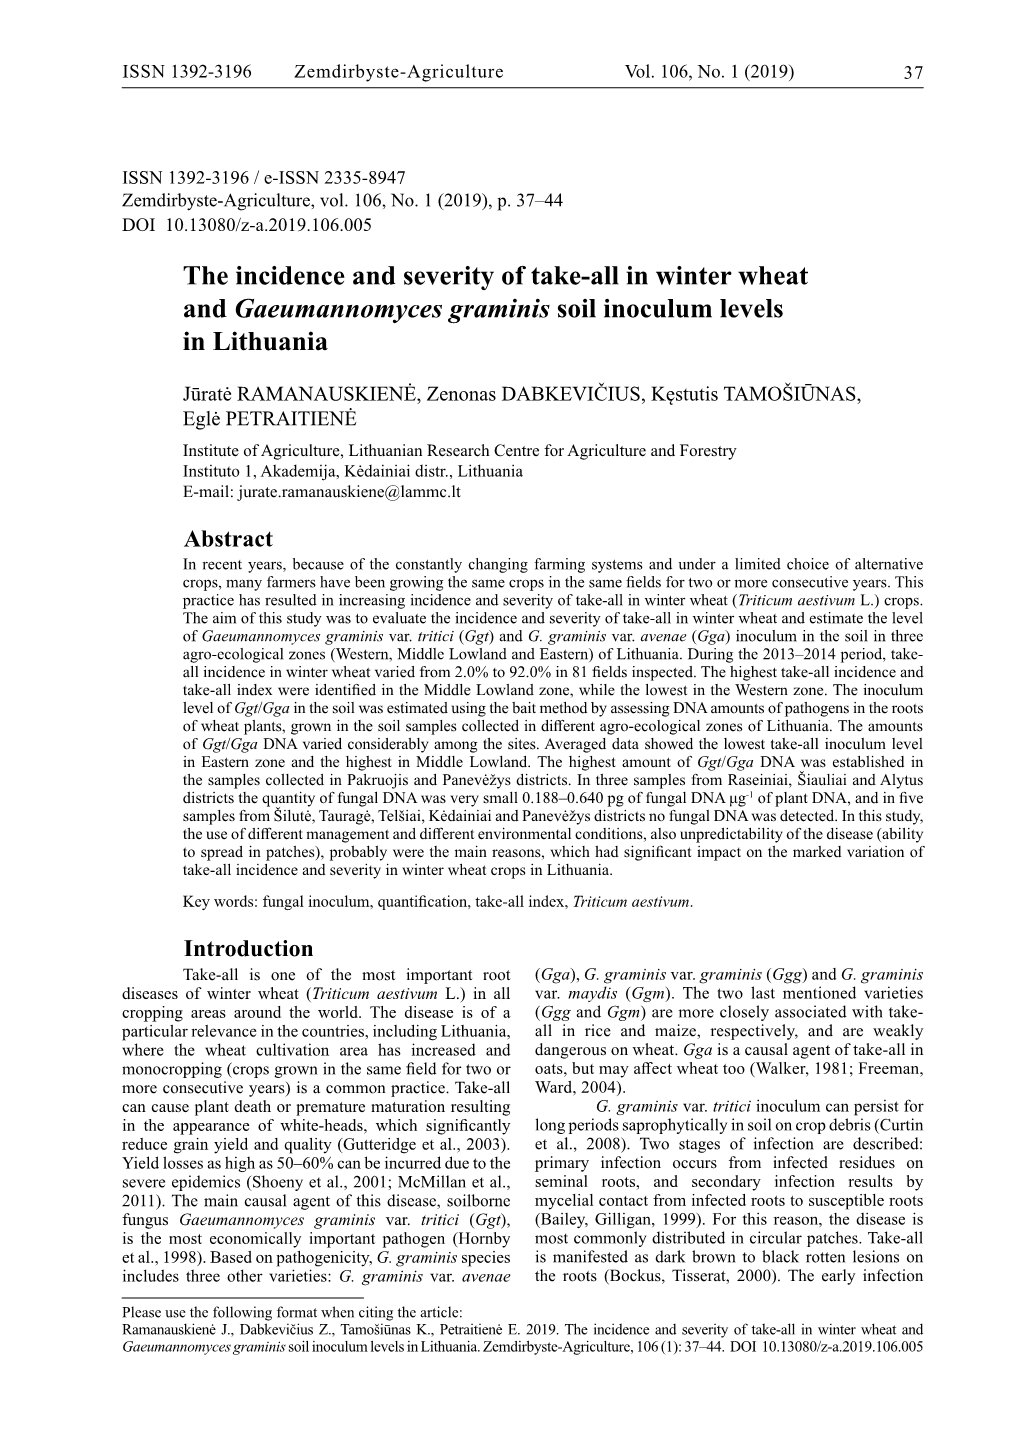 The Incidence and Severity of Take-All in Winter Wheat and Gaeumannomyces Graminis Soil Inoculum Levels in Lithuania